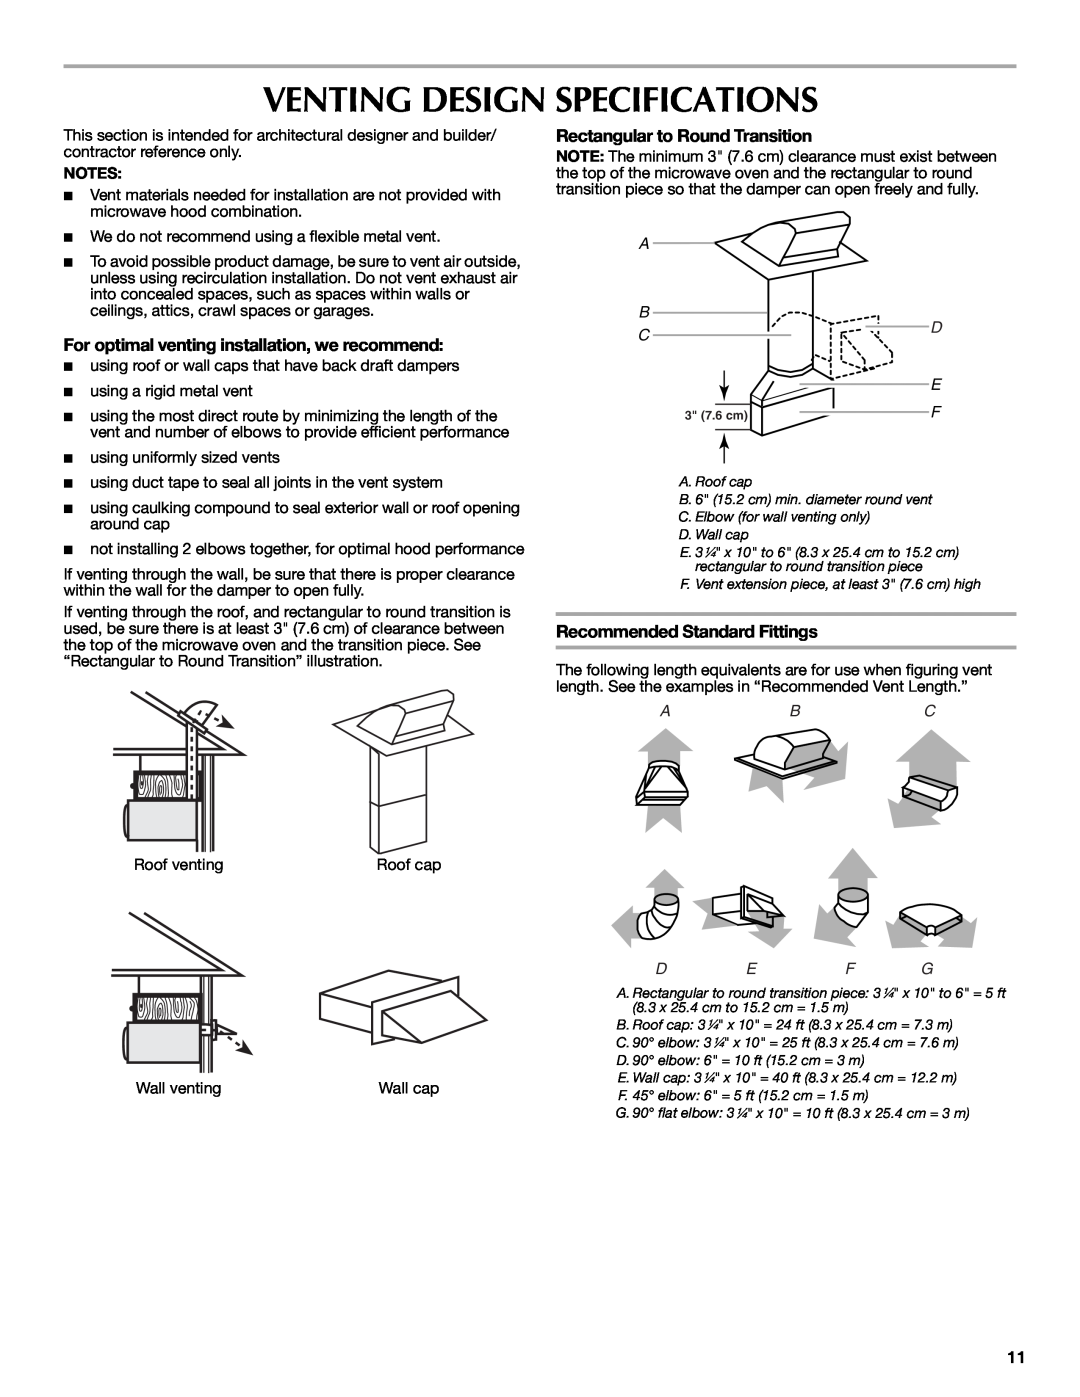 Maytag MMV5208WS Venting Design Specifications, For optimal venting installation, we recommend, Defg 